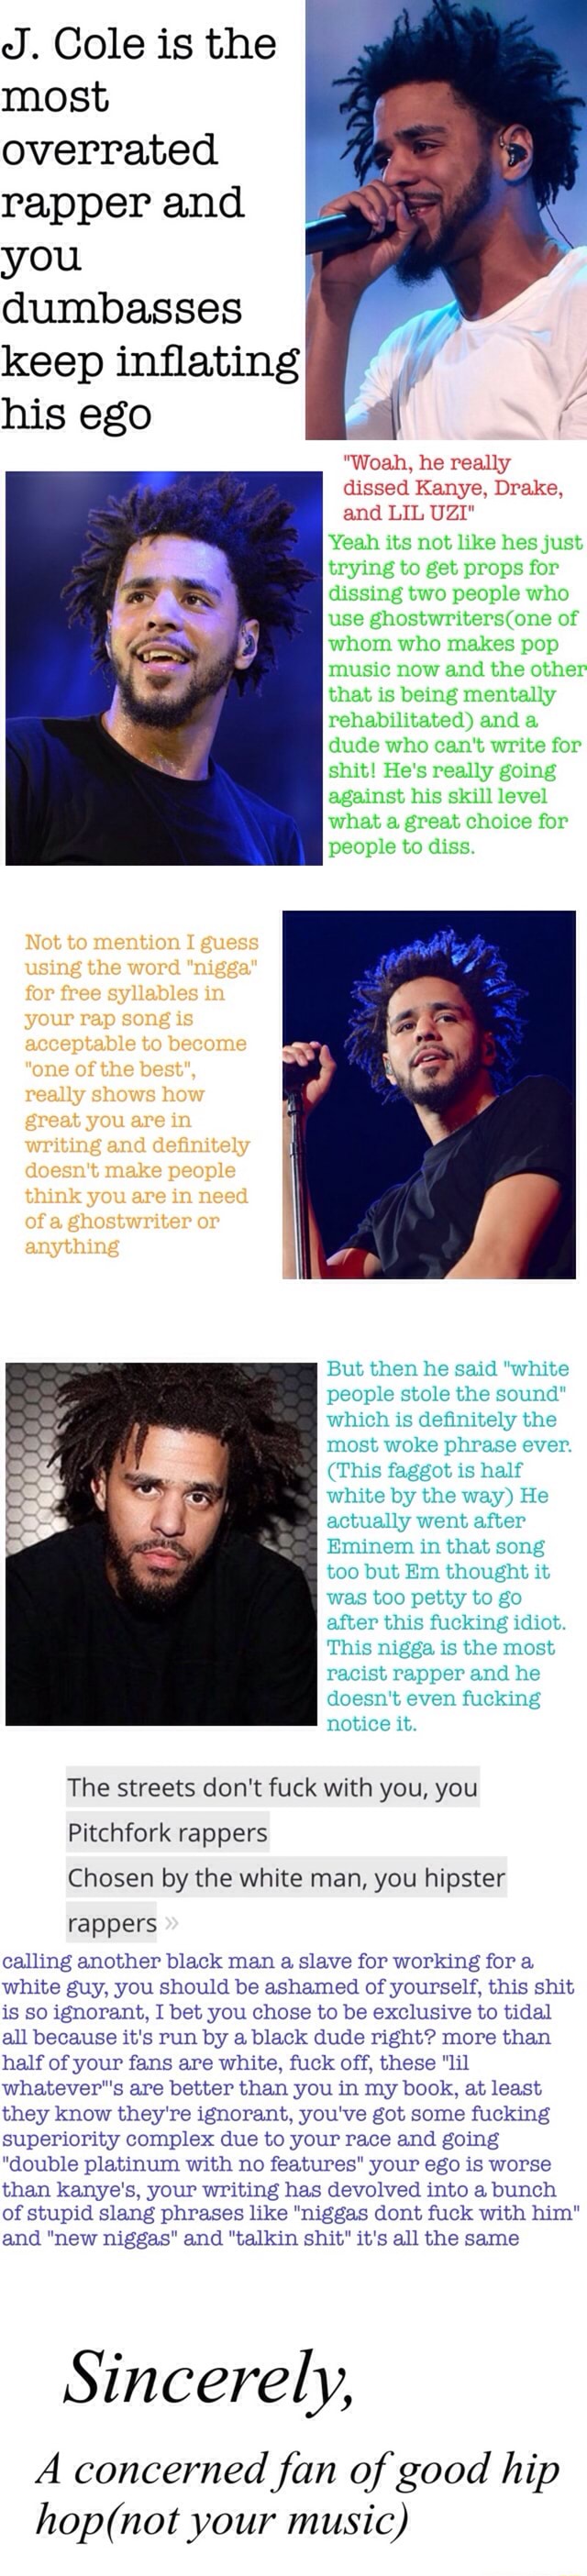 J . Cole is the most overrated rapper and you dumbasses keep inﬂating his ego he really dissed Kanye. Drake, and LIL - )